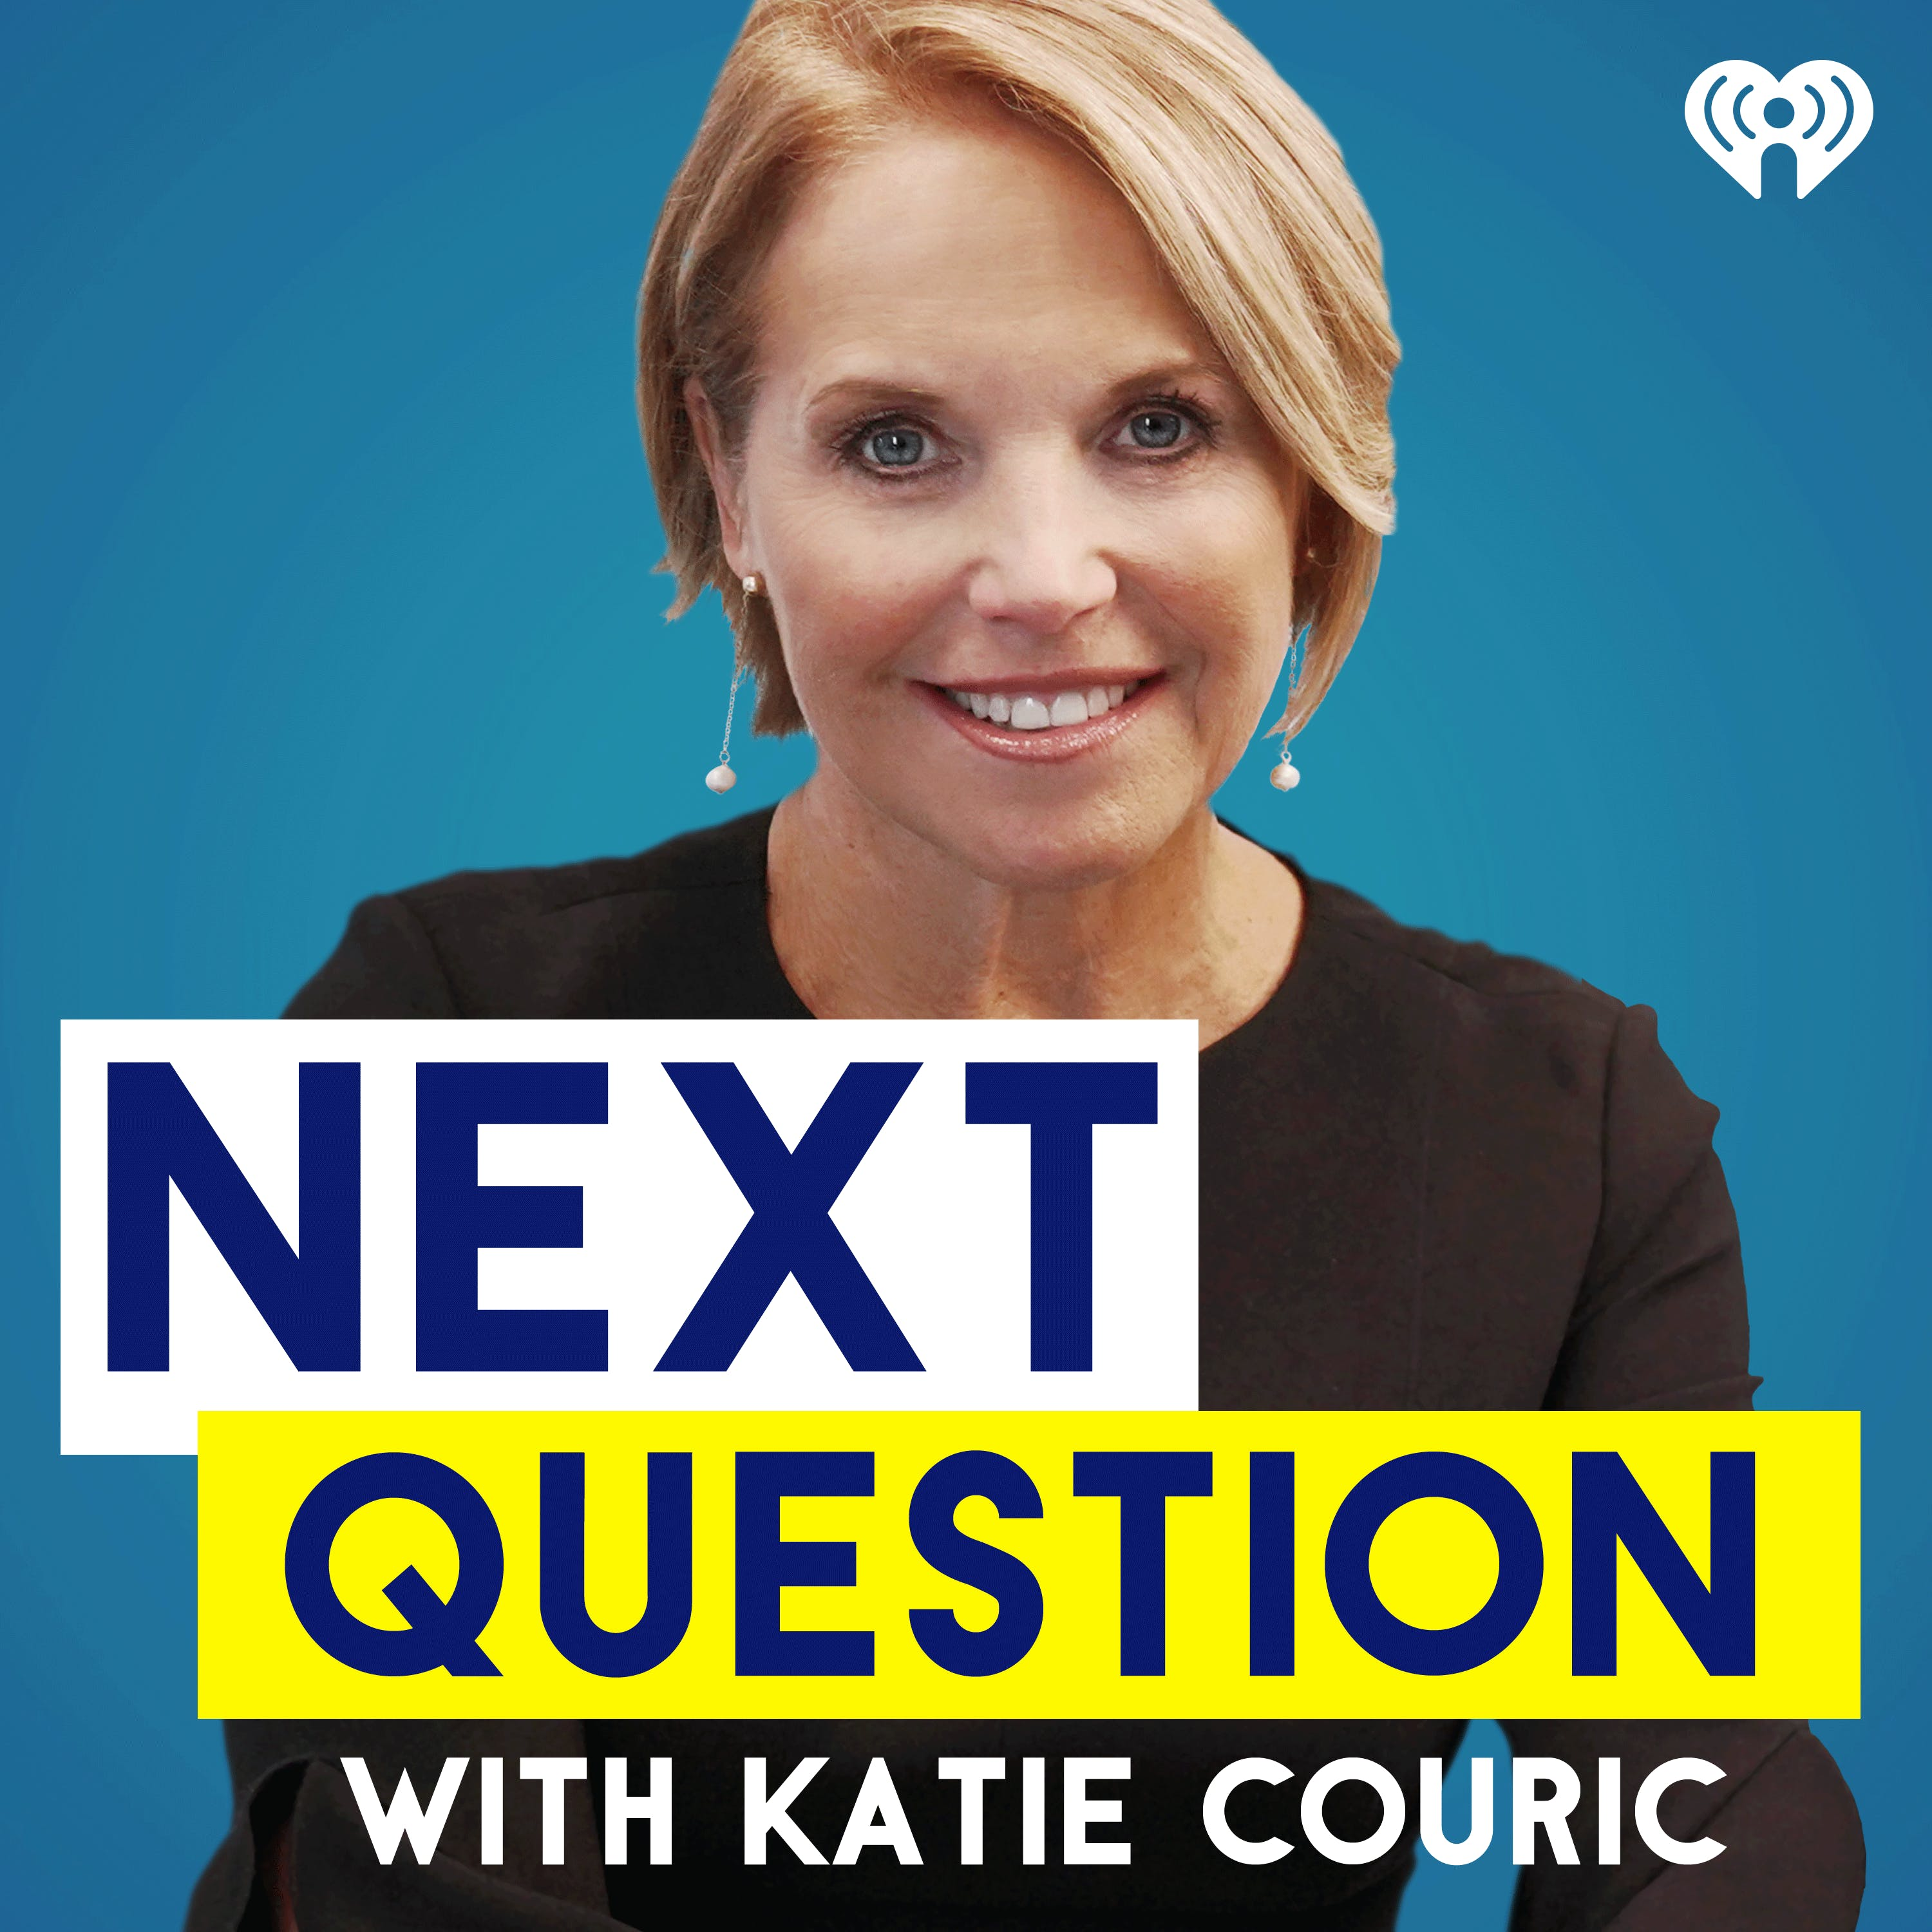 Introducing: Next Question with Katie Couric